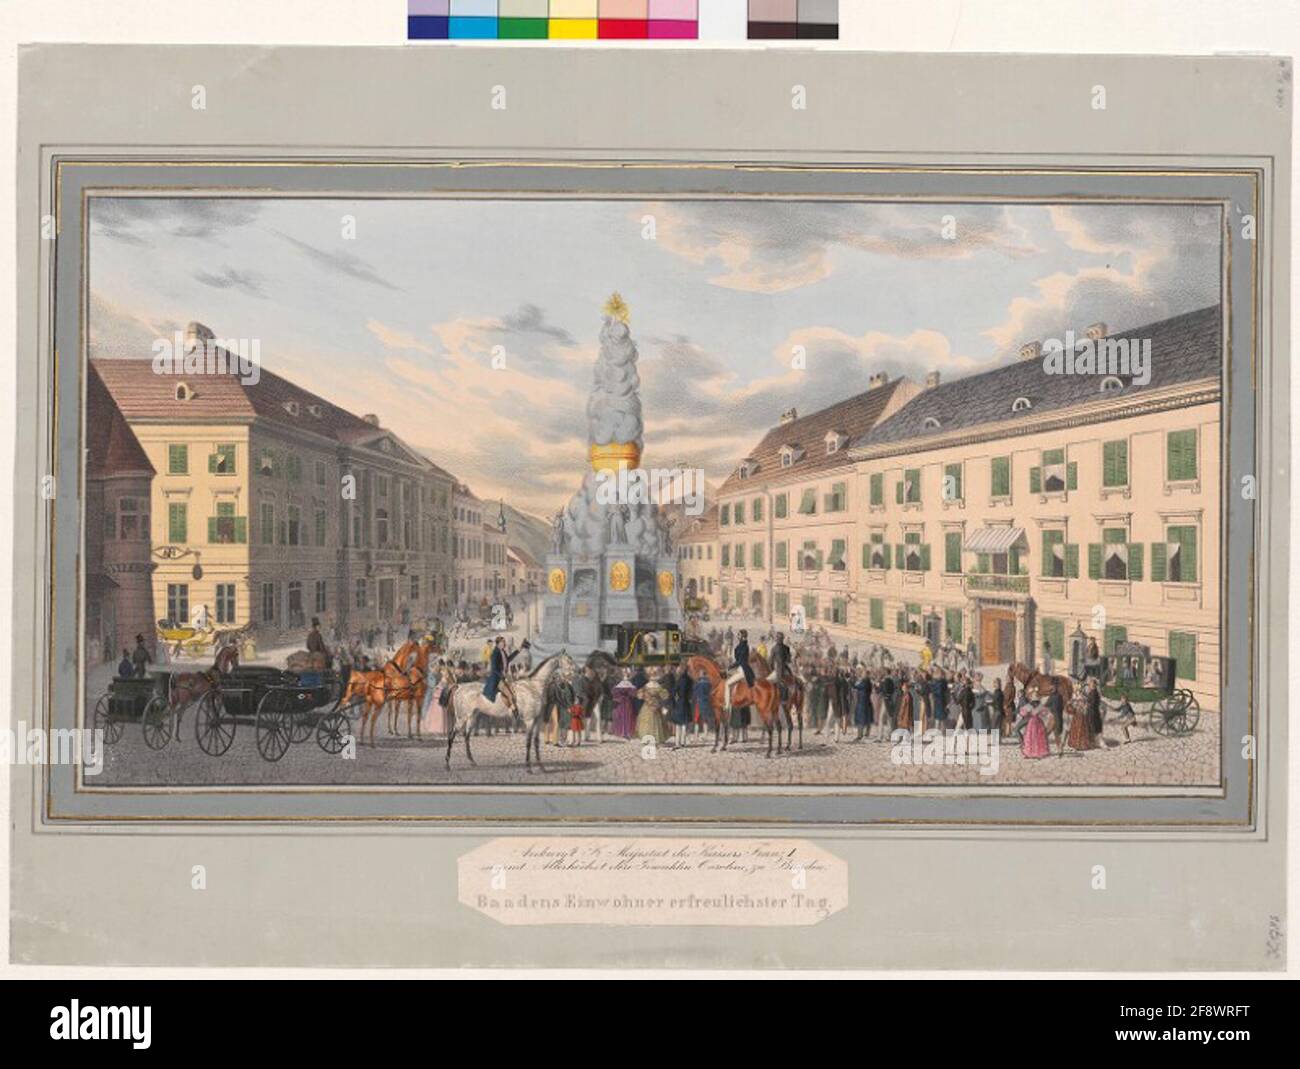 Arrival Sr. Majesty of the Emperor Franz I Sammed the highest denchmastin Caroline in Baden Arrival of the Imperial couple in front of the imperial summer residence in Baden, the so-called 'Kaiserhaus' .Colorised lithograph according to the drawing of Alexander von Bensa. Stock Photo